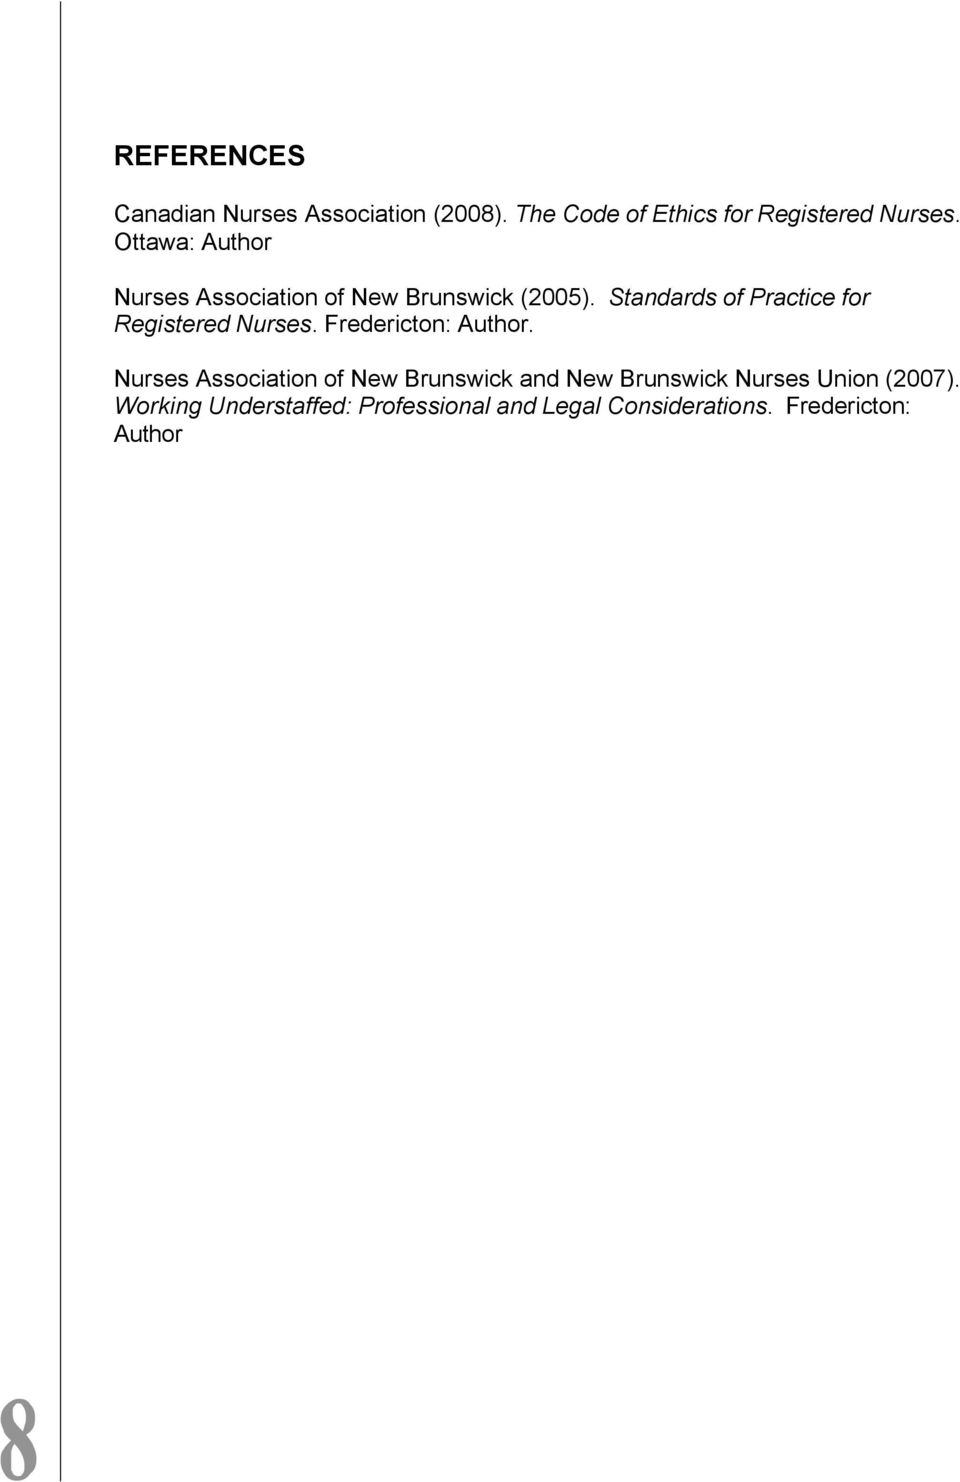 Standards of Practice for Registered Nurses. Fredericton: Author.